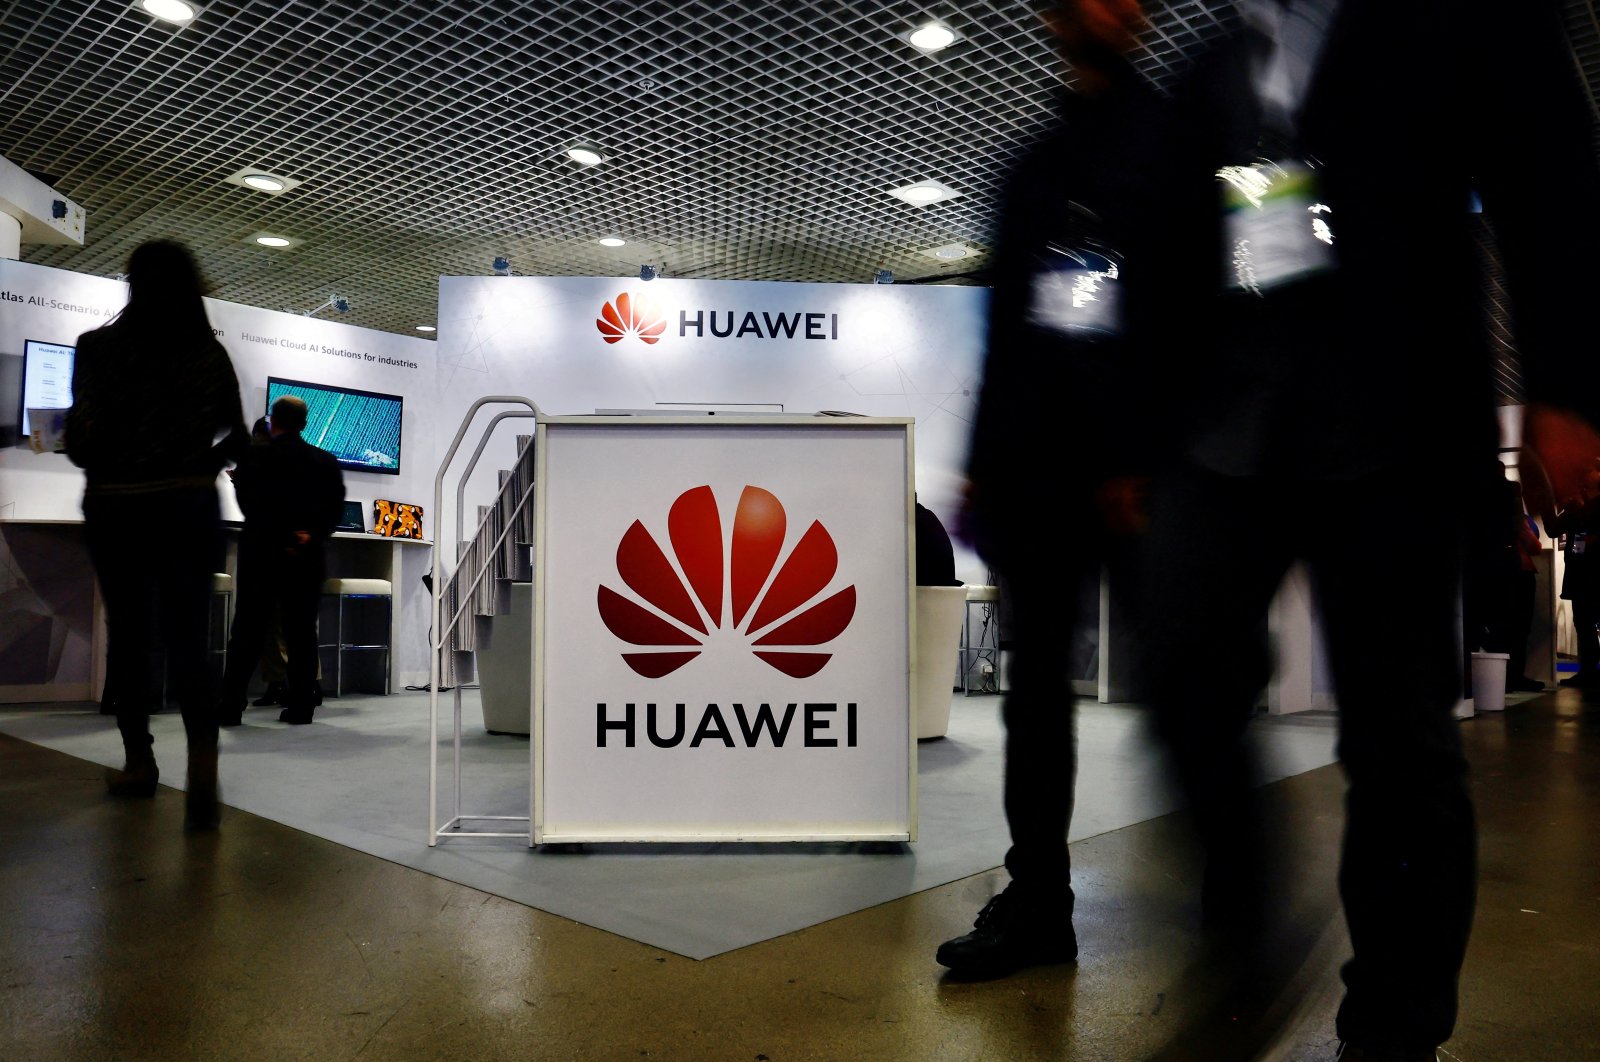 Visitors walk past the Huawei logo at the World Artificial Intelligence Cannes Festival (WAICF), Cannes, France, Feb. 10, 2023. (Reuters Photo)